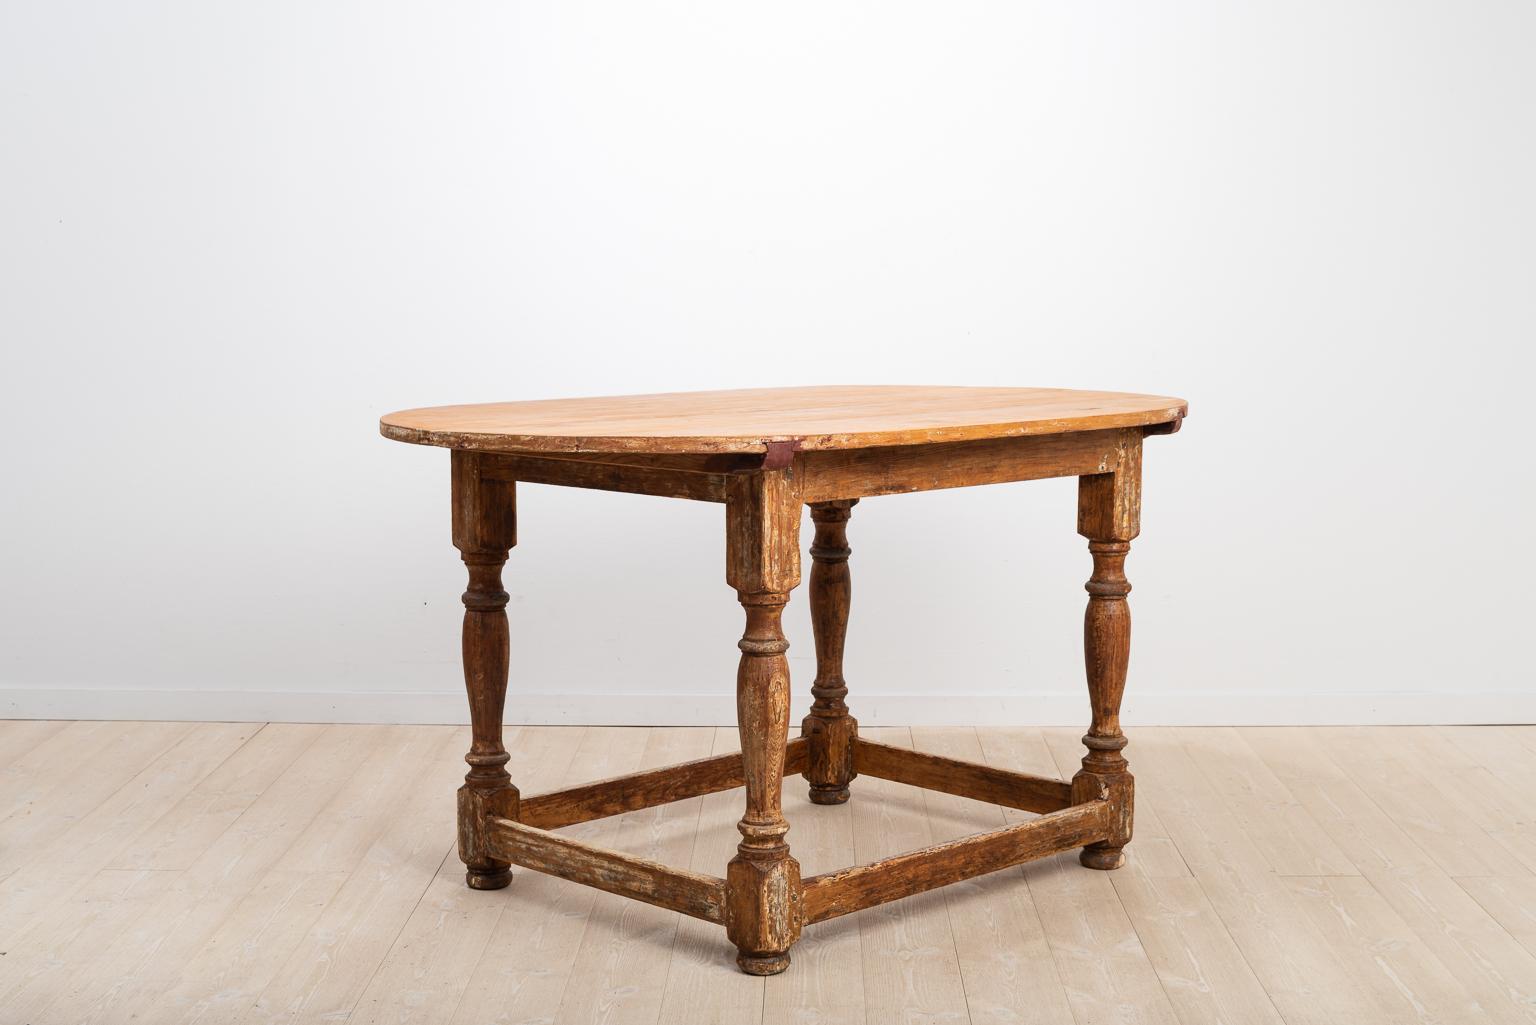 Antique Swedish baroque centre table in pine. The table is originally from northern Sweden and has wonderful proportions with the four turned legs and a sizeable table top. A monogram is branded on the underside of the table. Mostly likely the